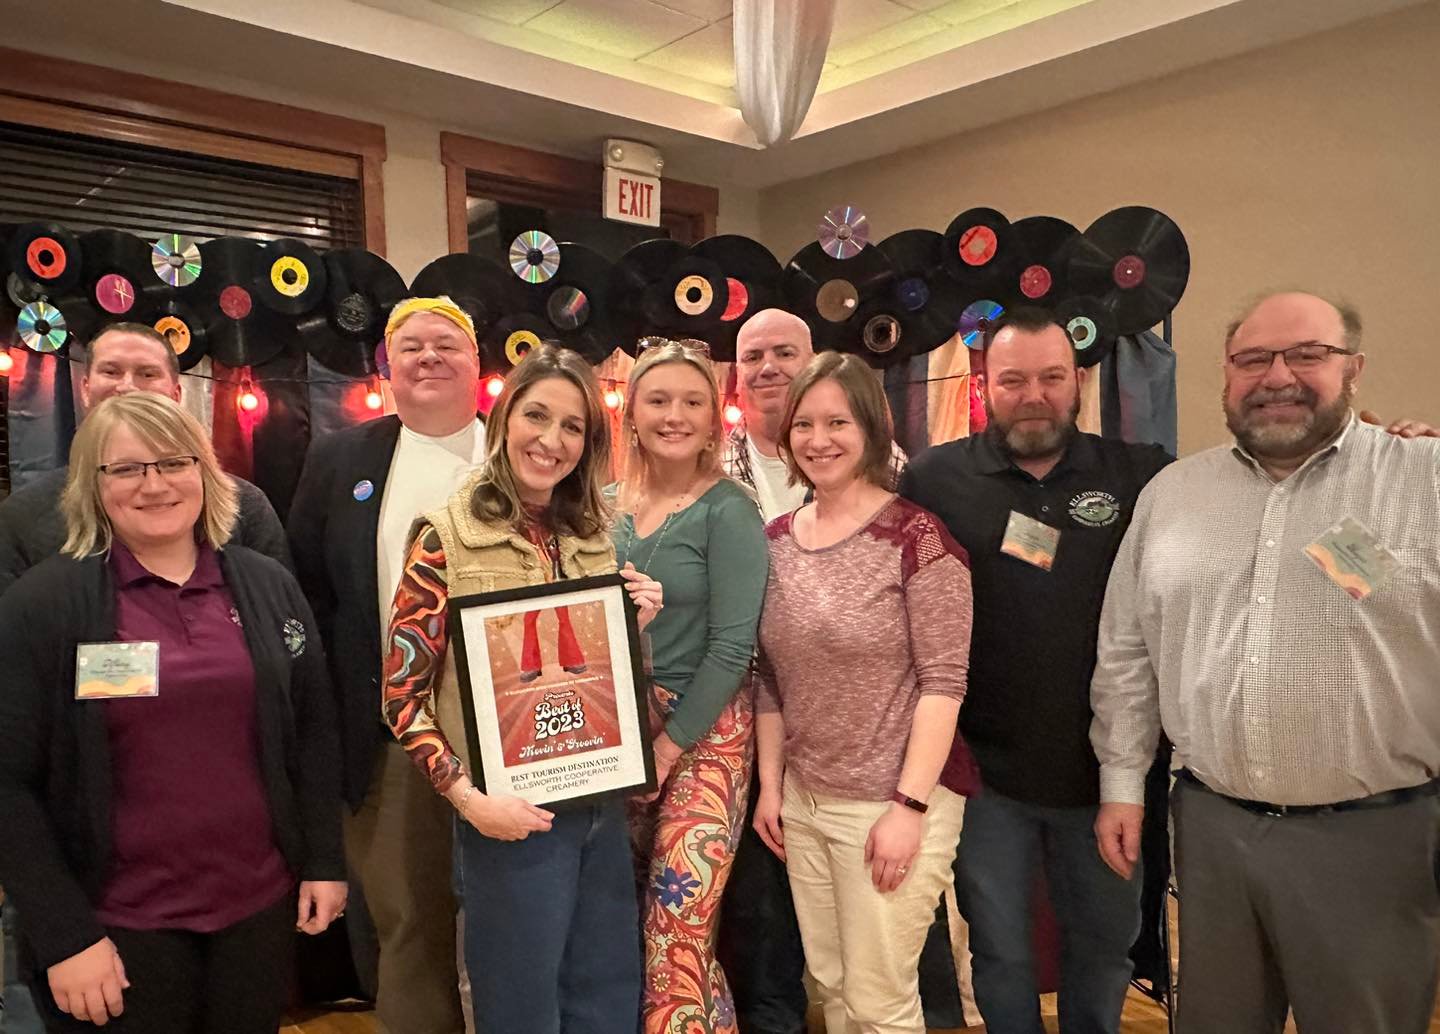 Becky Beissel, Ellsworth Chamber executive committee member, presented the Best Tourism/Destination award to Ellsworth Cooperative Creamery Feb. 20. The public was asked to vote for businesses in each category.